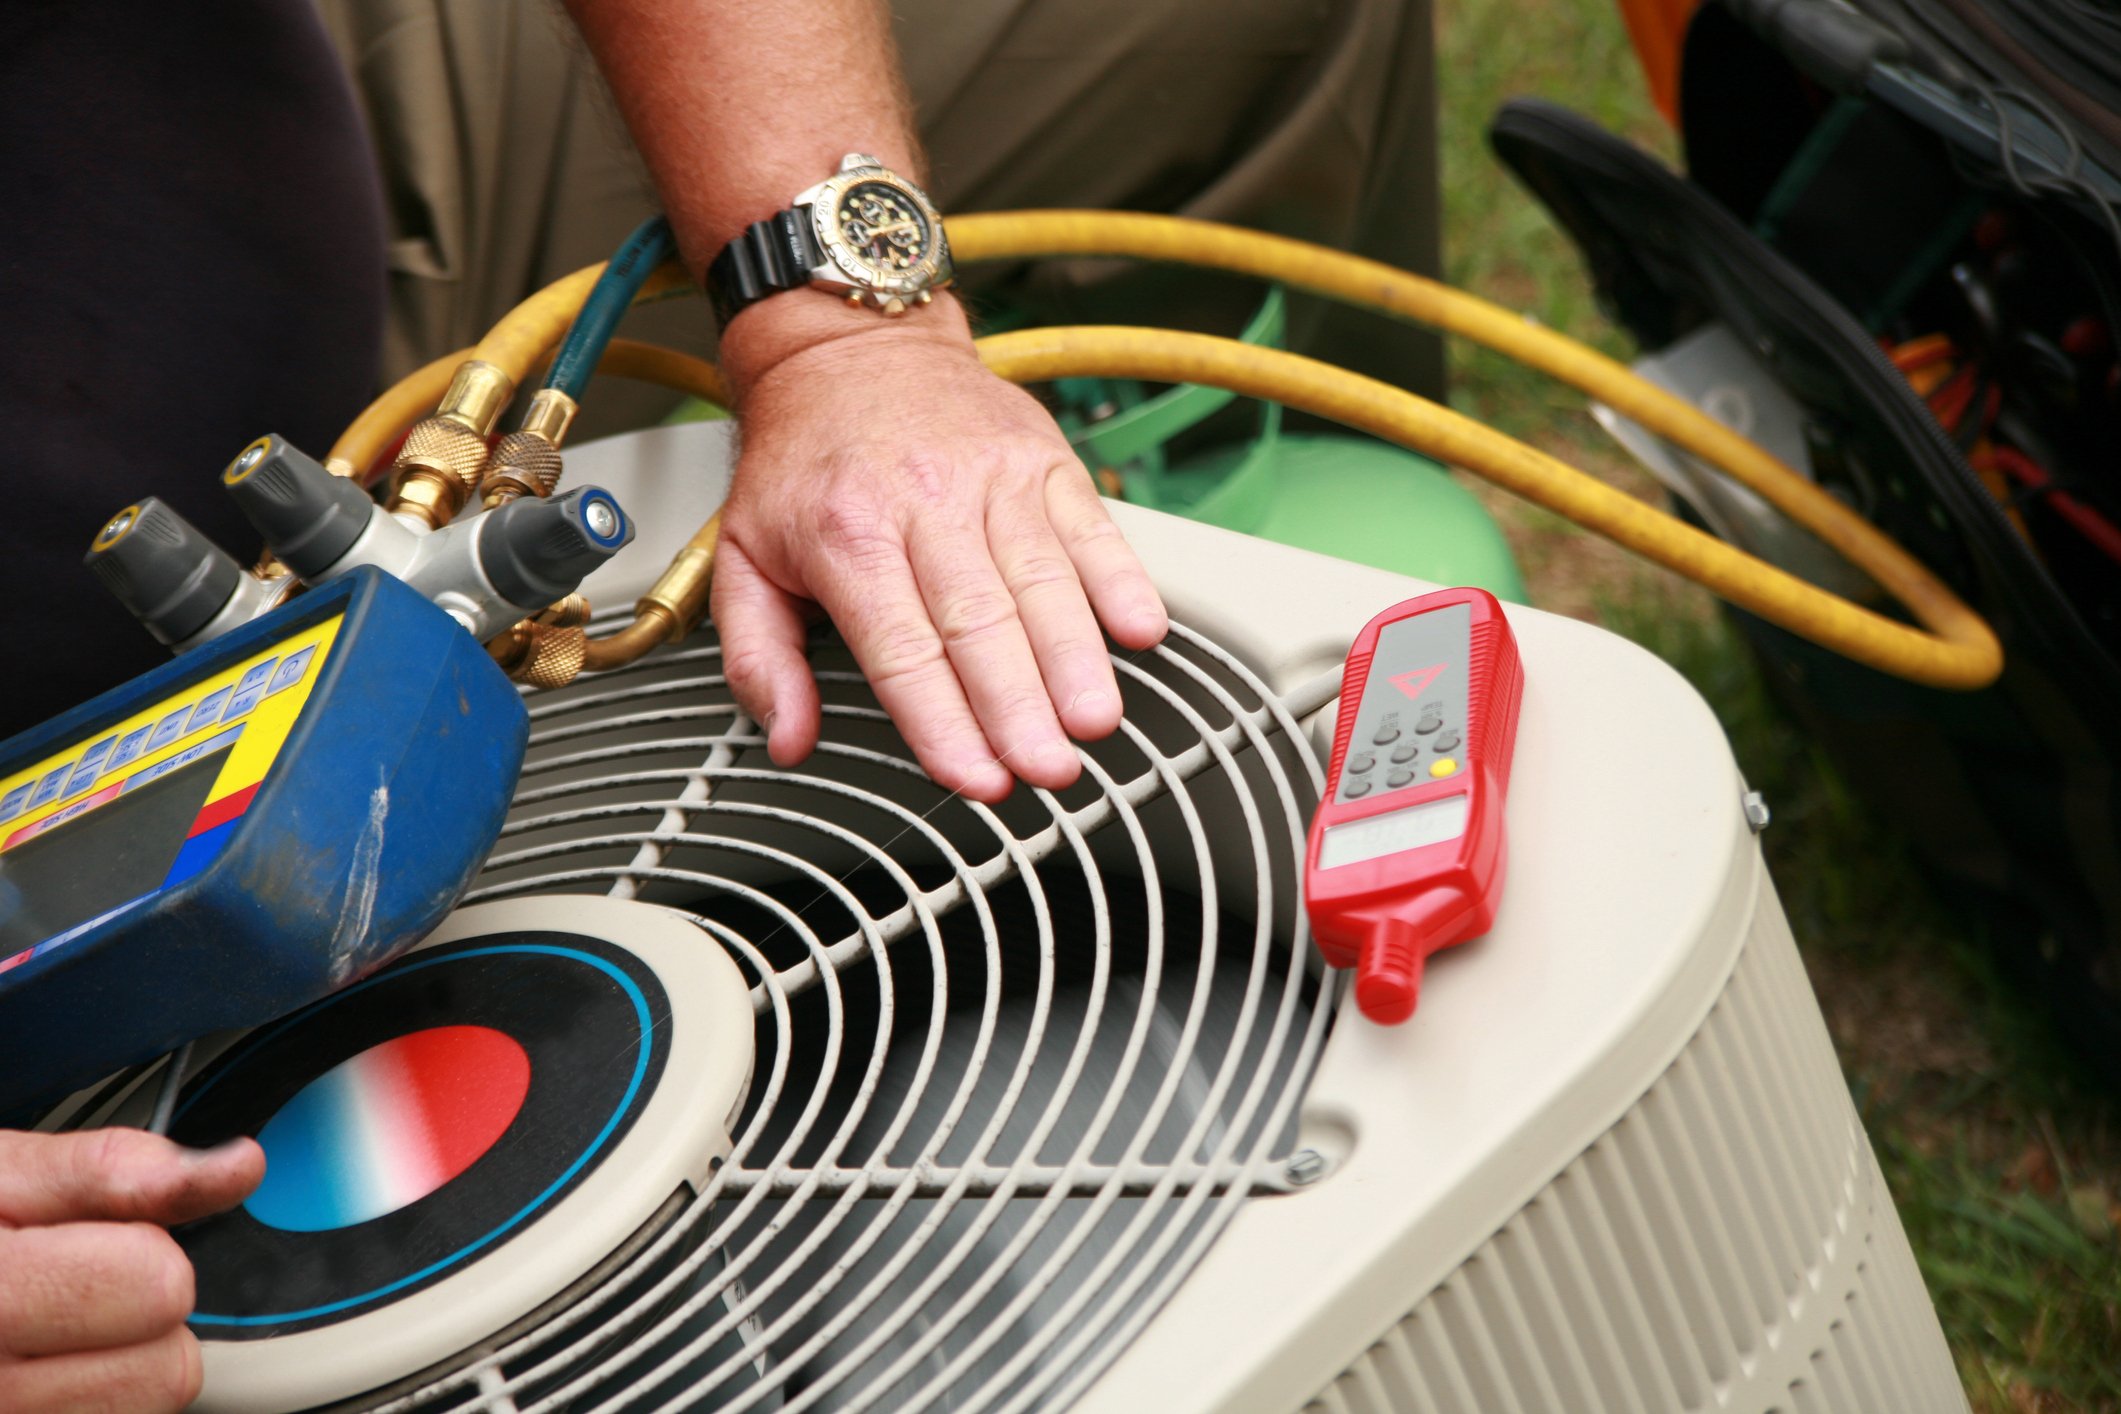 Man fixing air conditioning unit